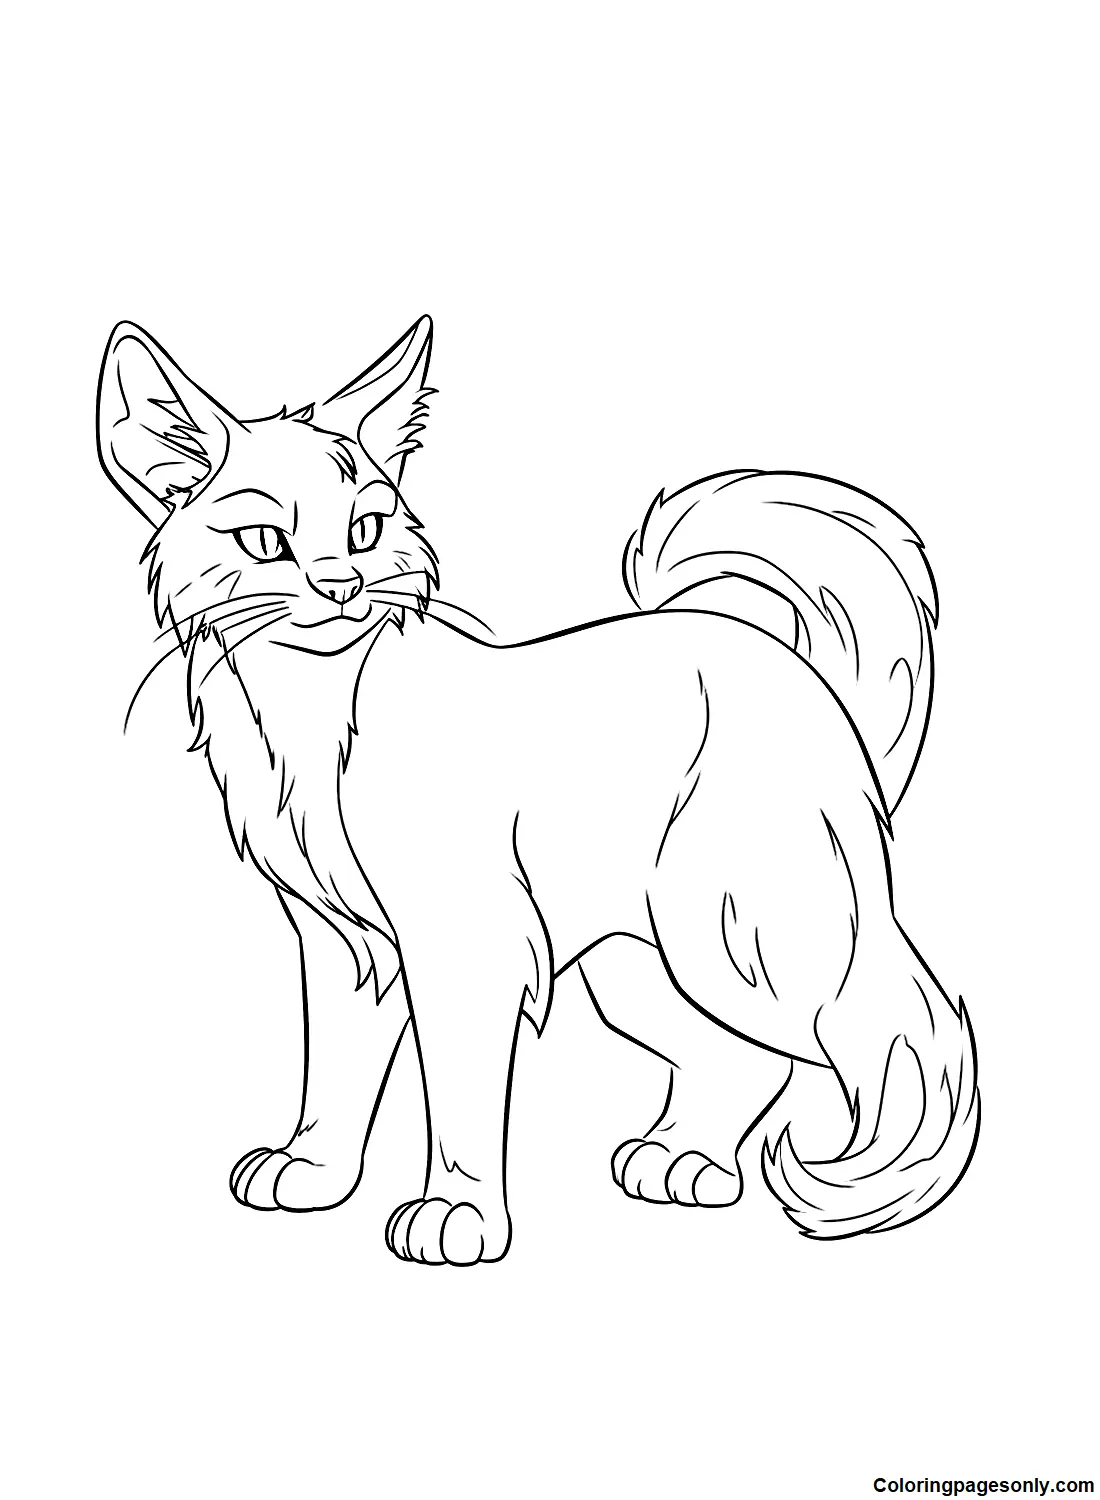 Warrior Cats Coloring Pages